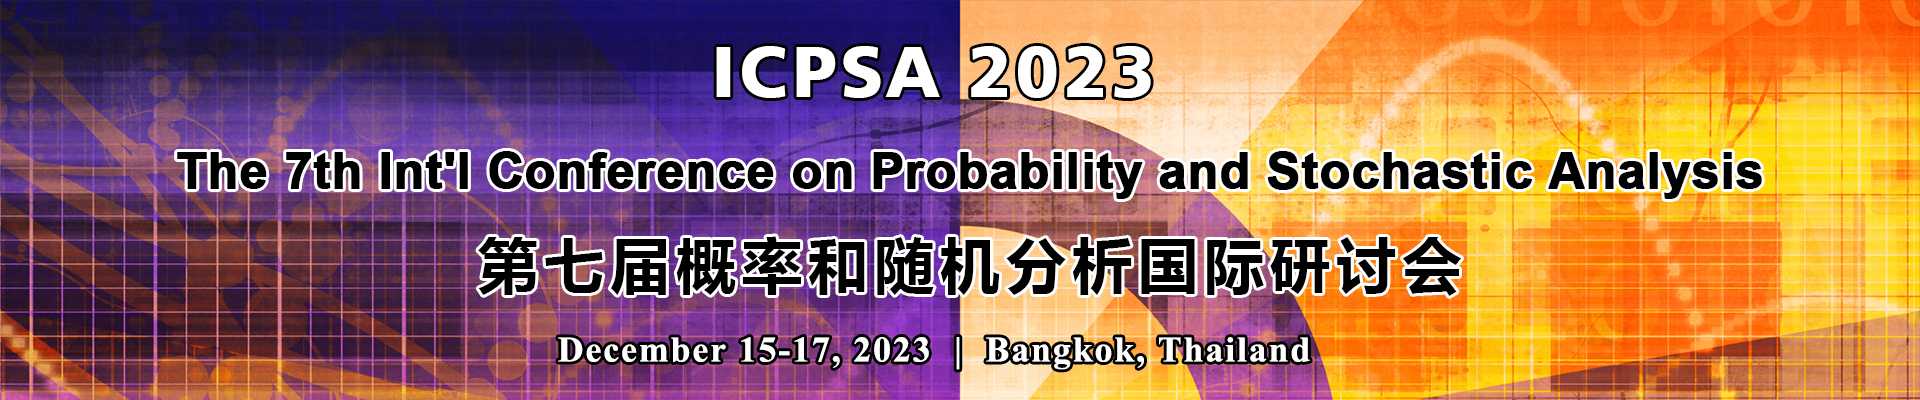 The 7th Int'l Conference on Probability and Stochastic Analysis (ICPSA 2023)